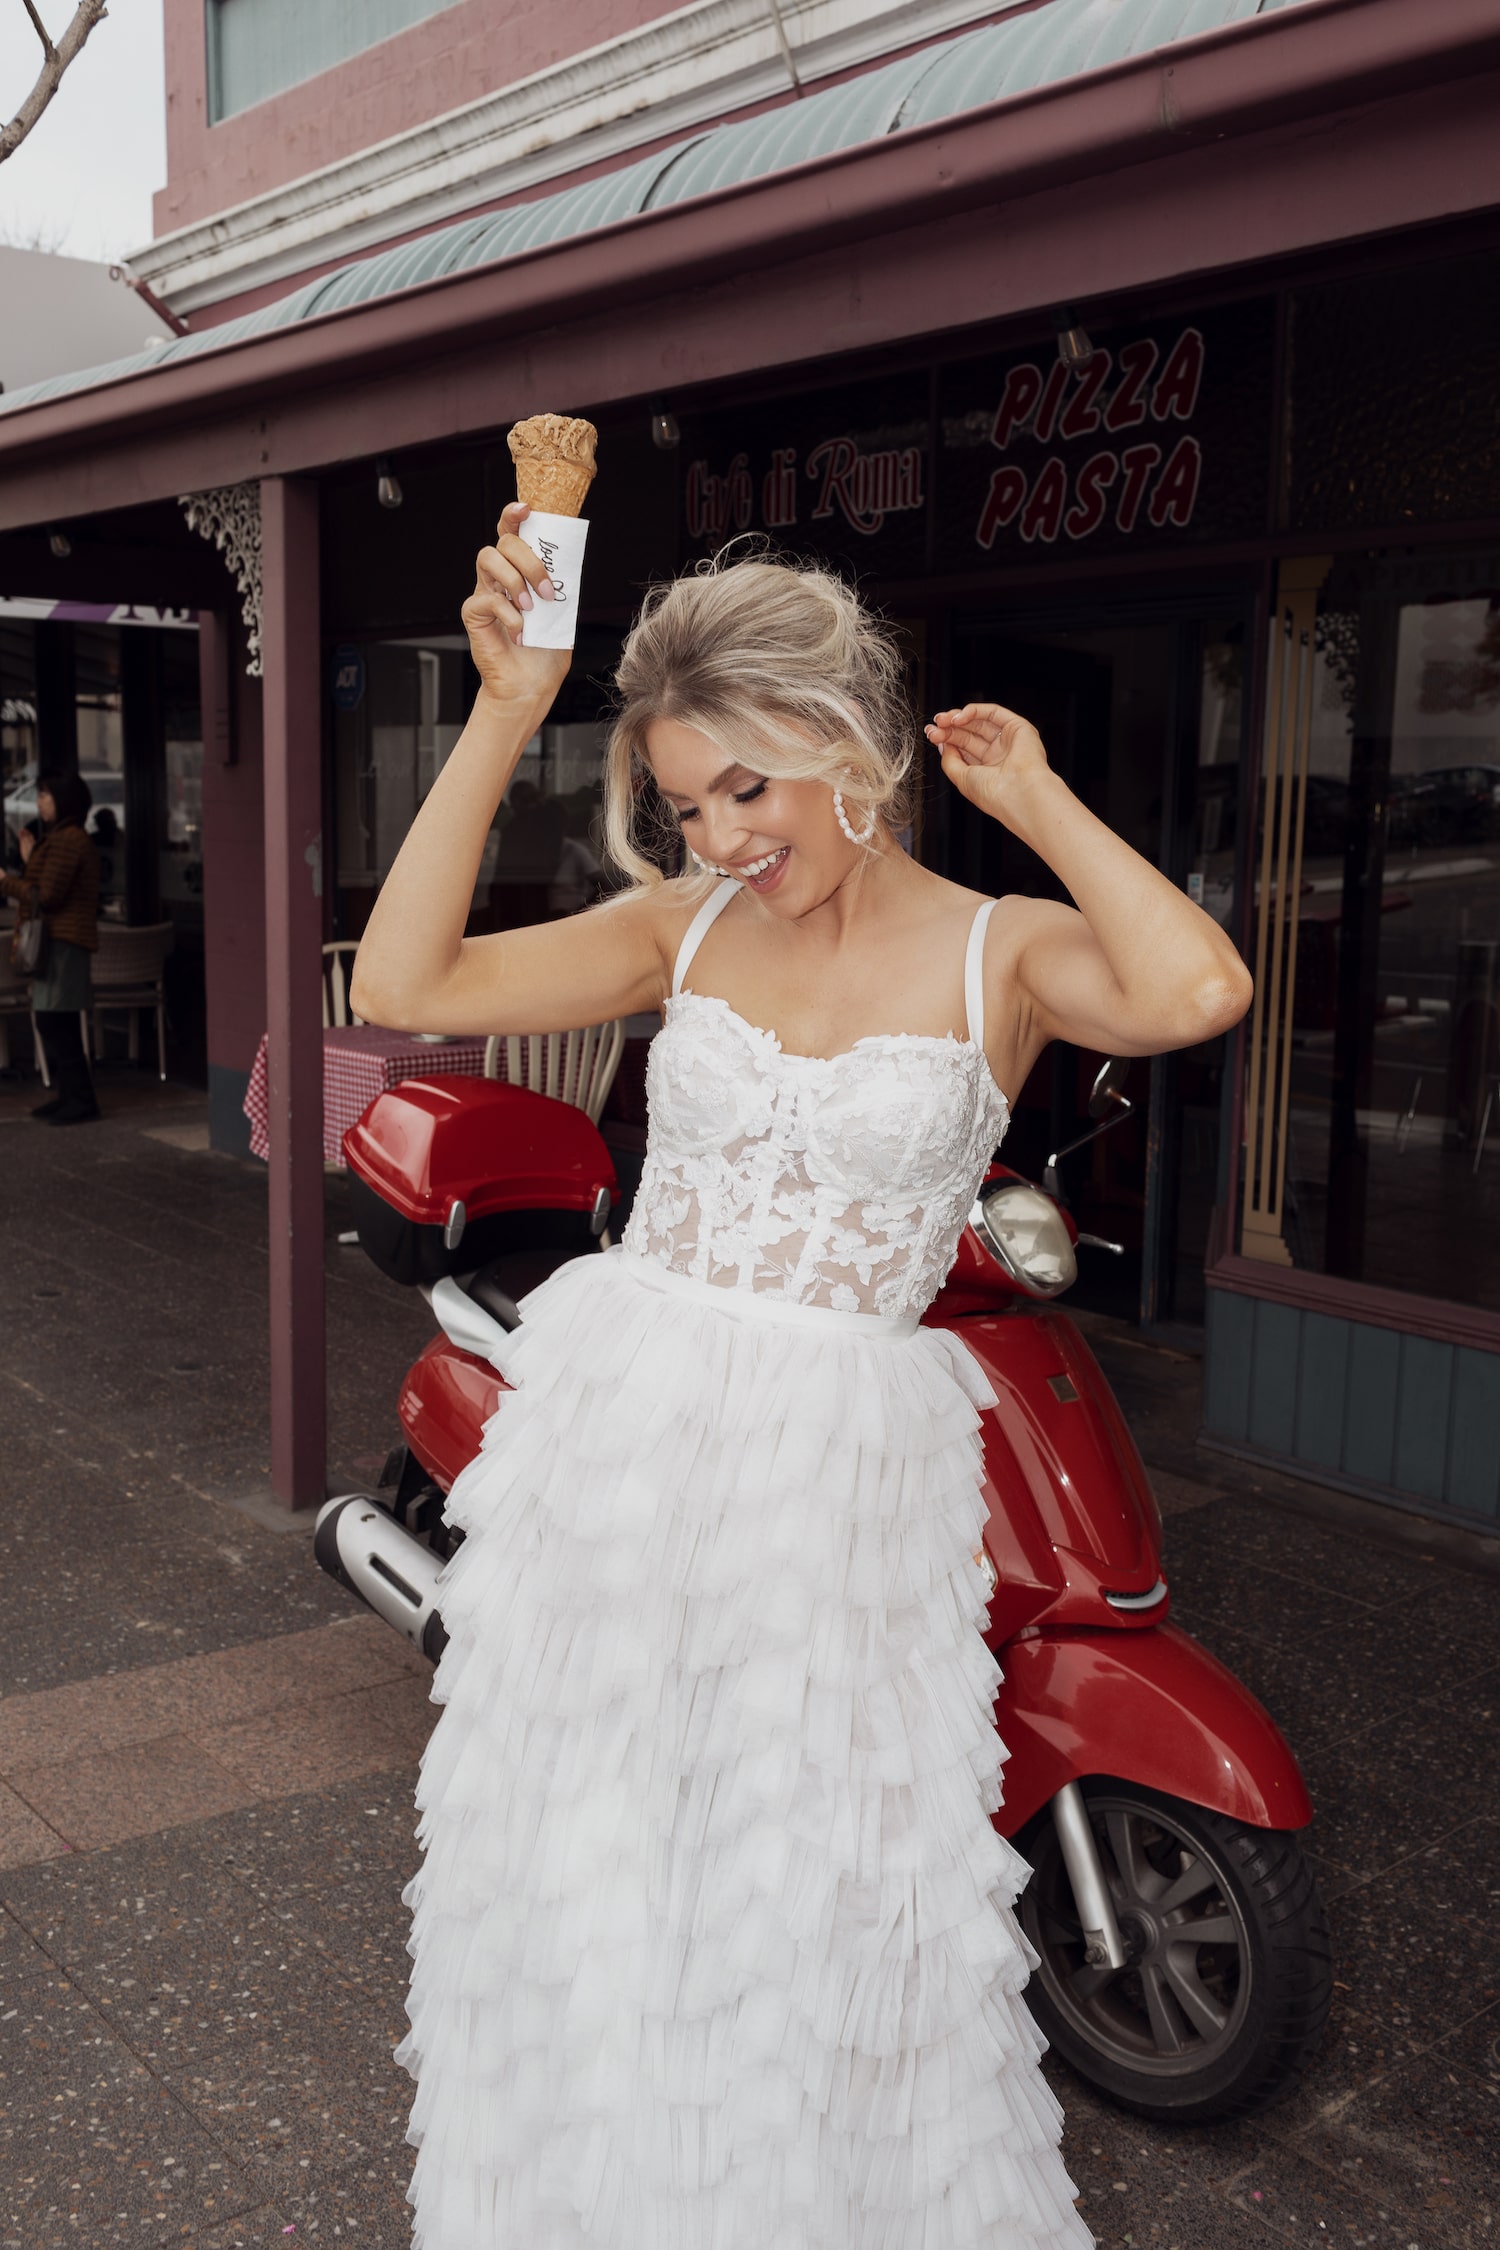 Model posing with icecream in front of red scooter